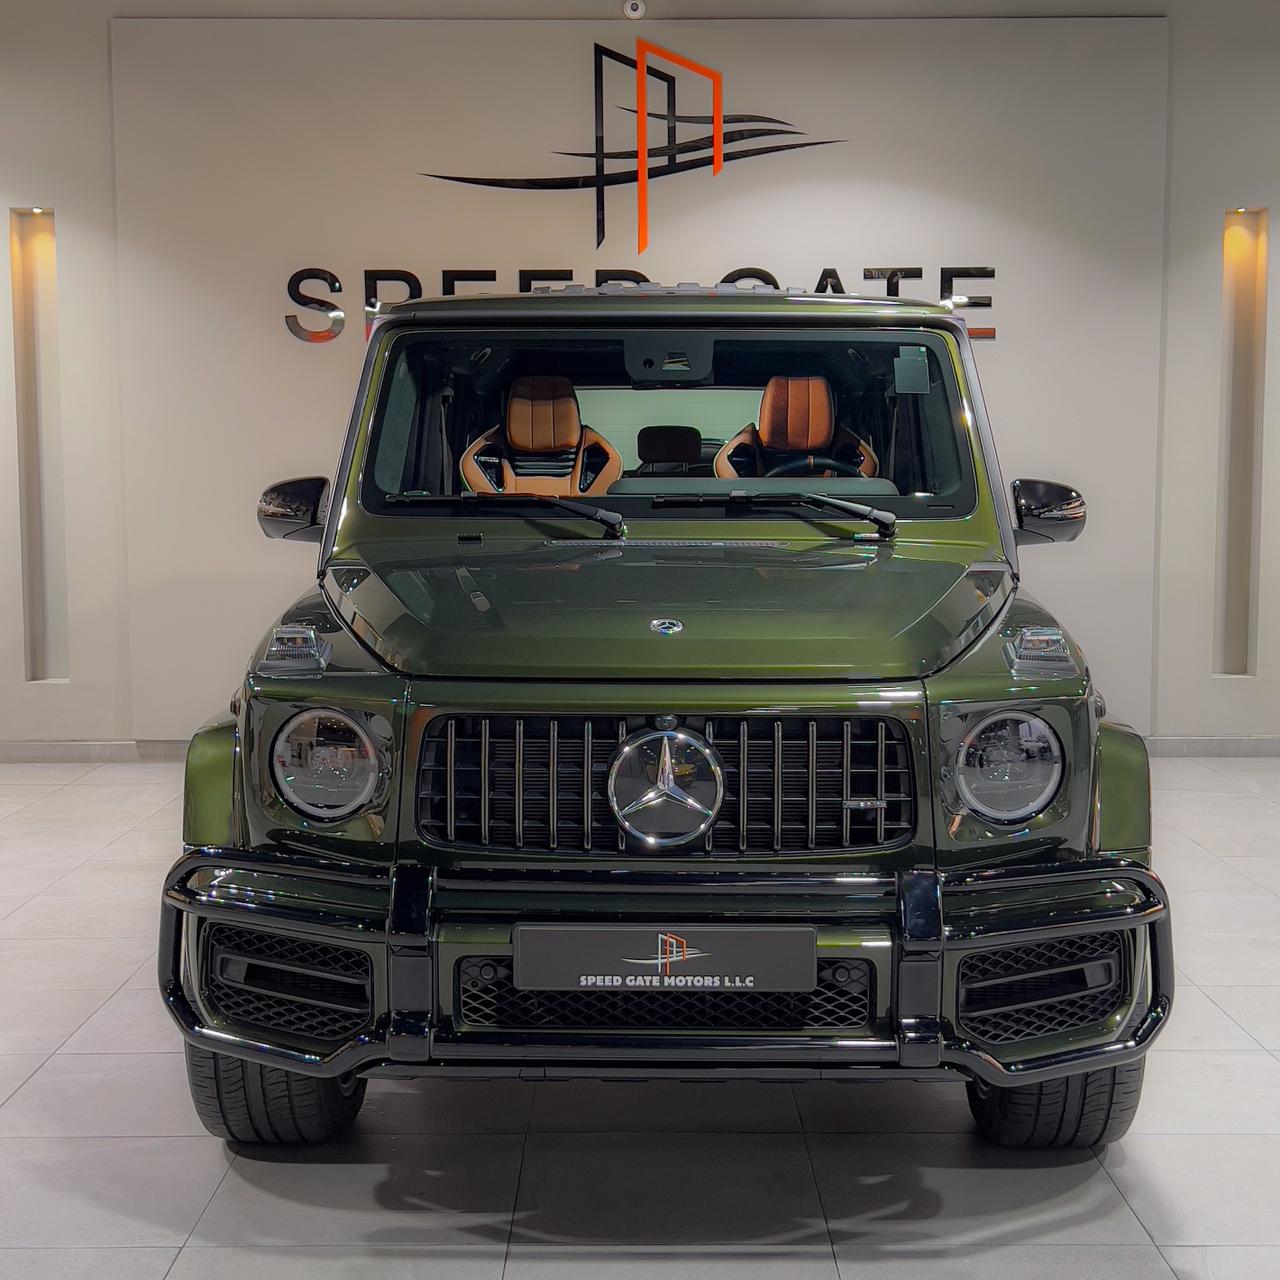 MERCEDES G63 AMG 4.0L 40 YEARS OF LEGEND AT PTR MODEL 2021 - 18400 KM